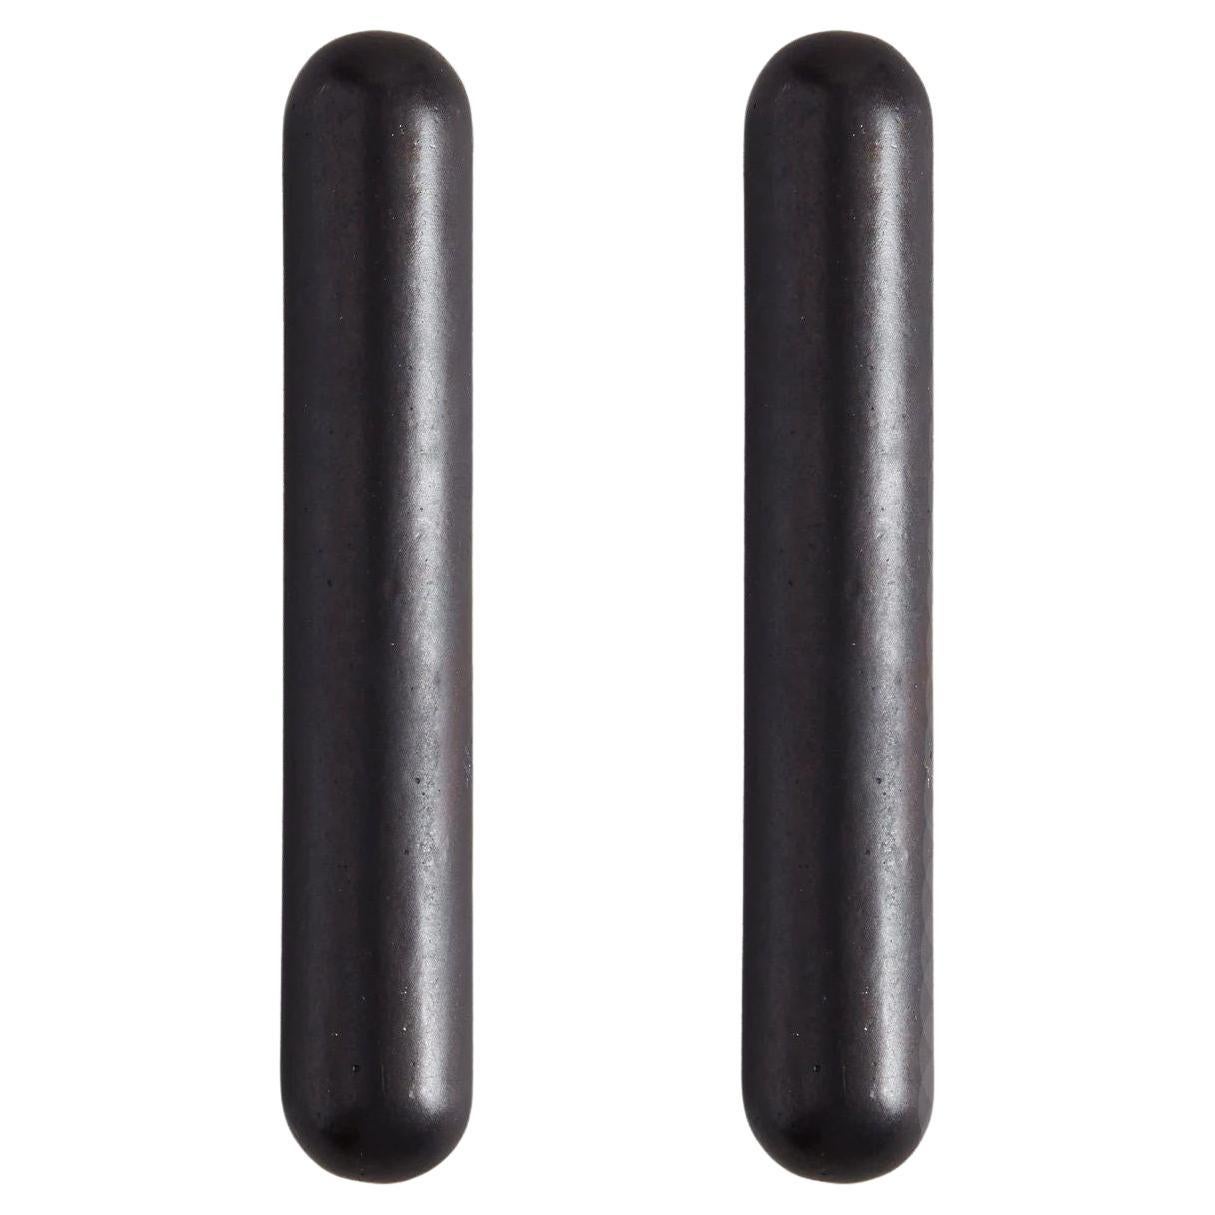 Set of 2 Polished Blackened Bronze PSL Handles by Henry Wilson